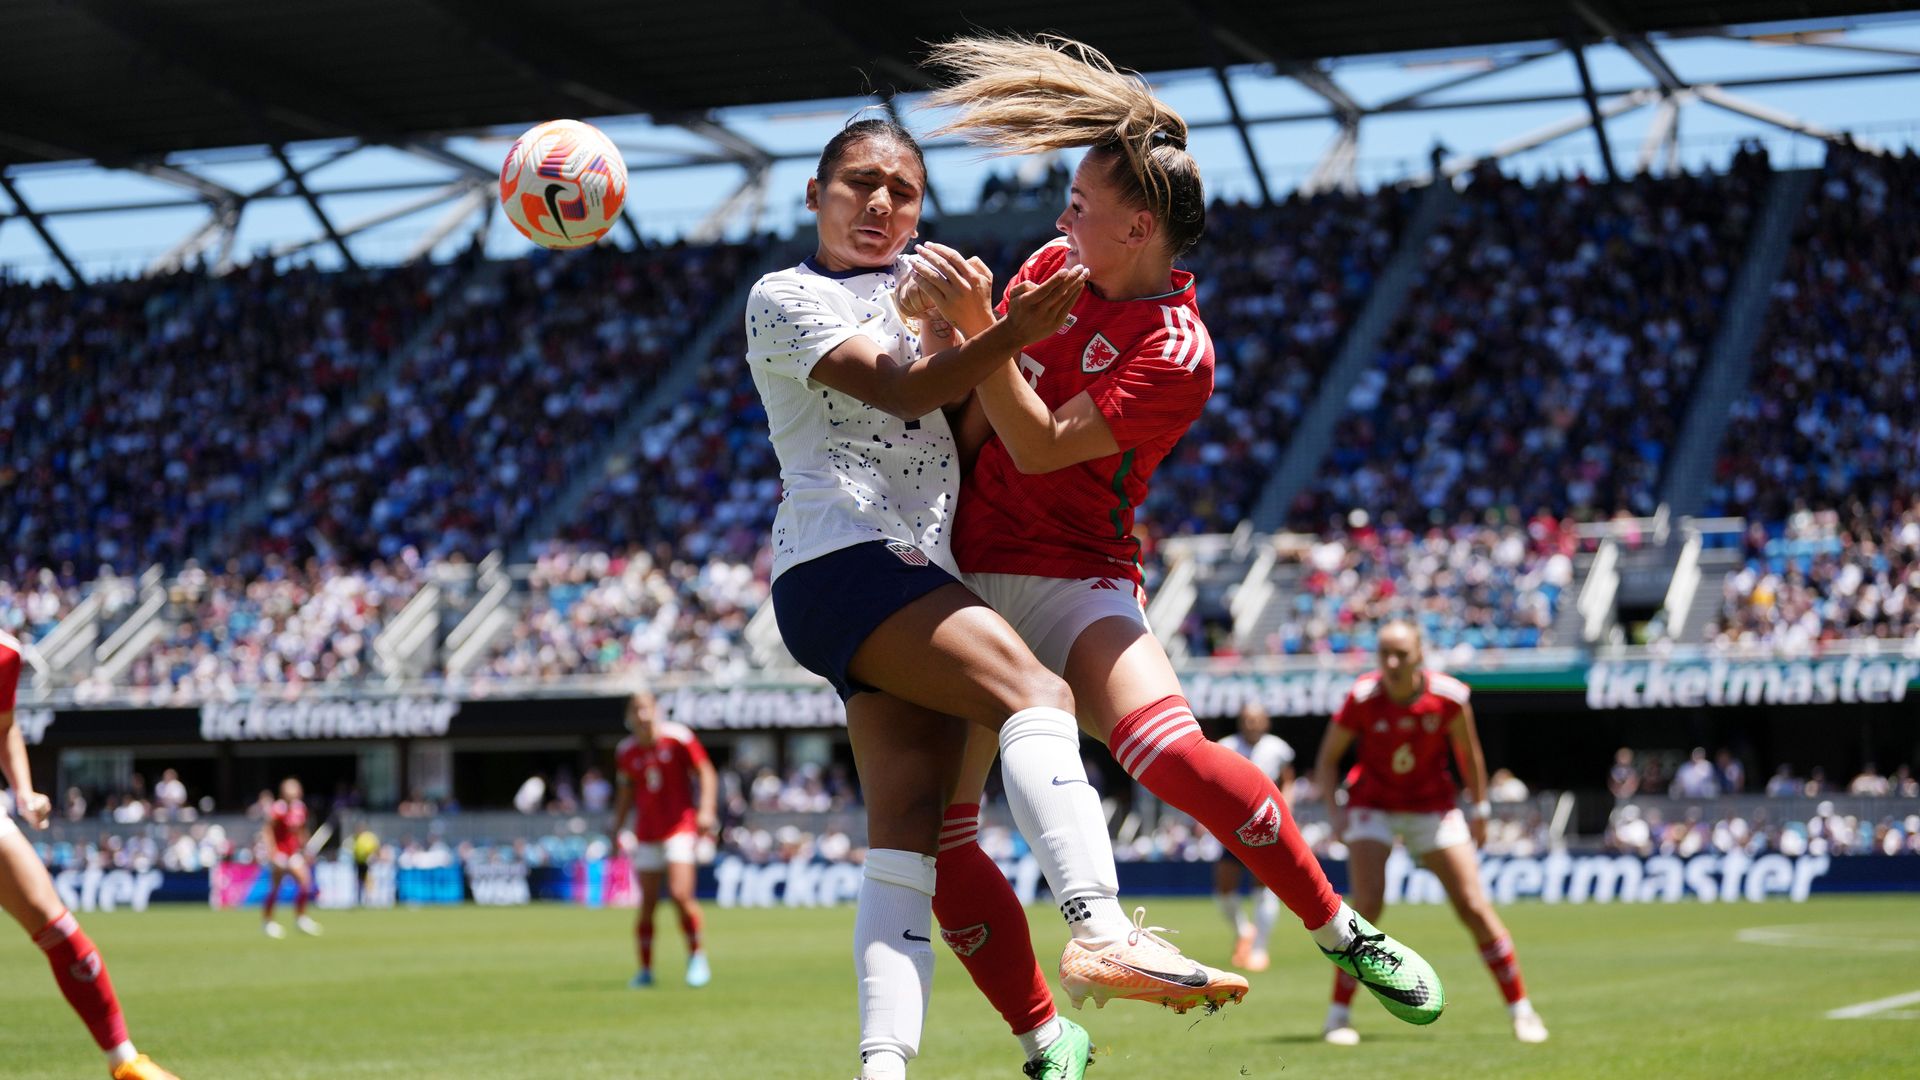 Women's football 'poised for exponential growth'